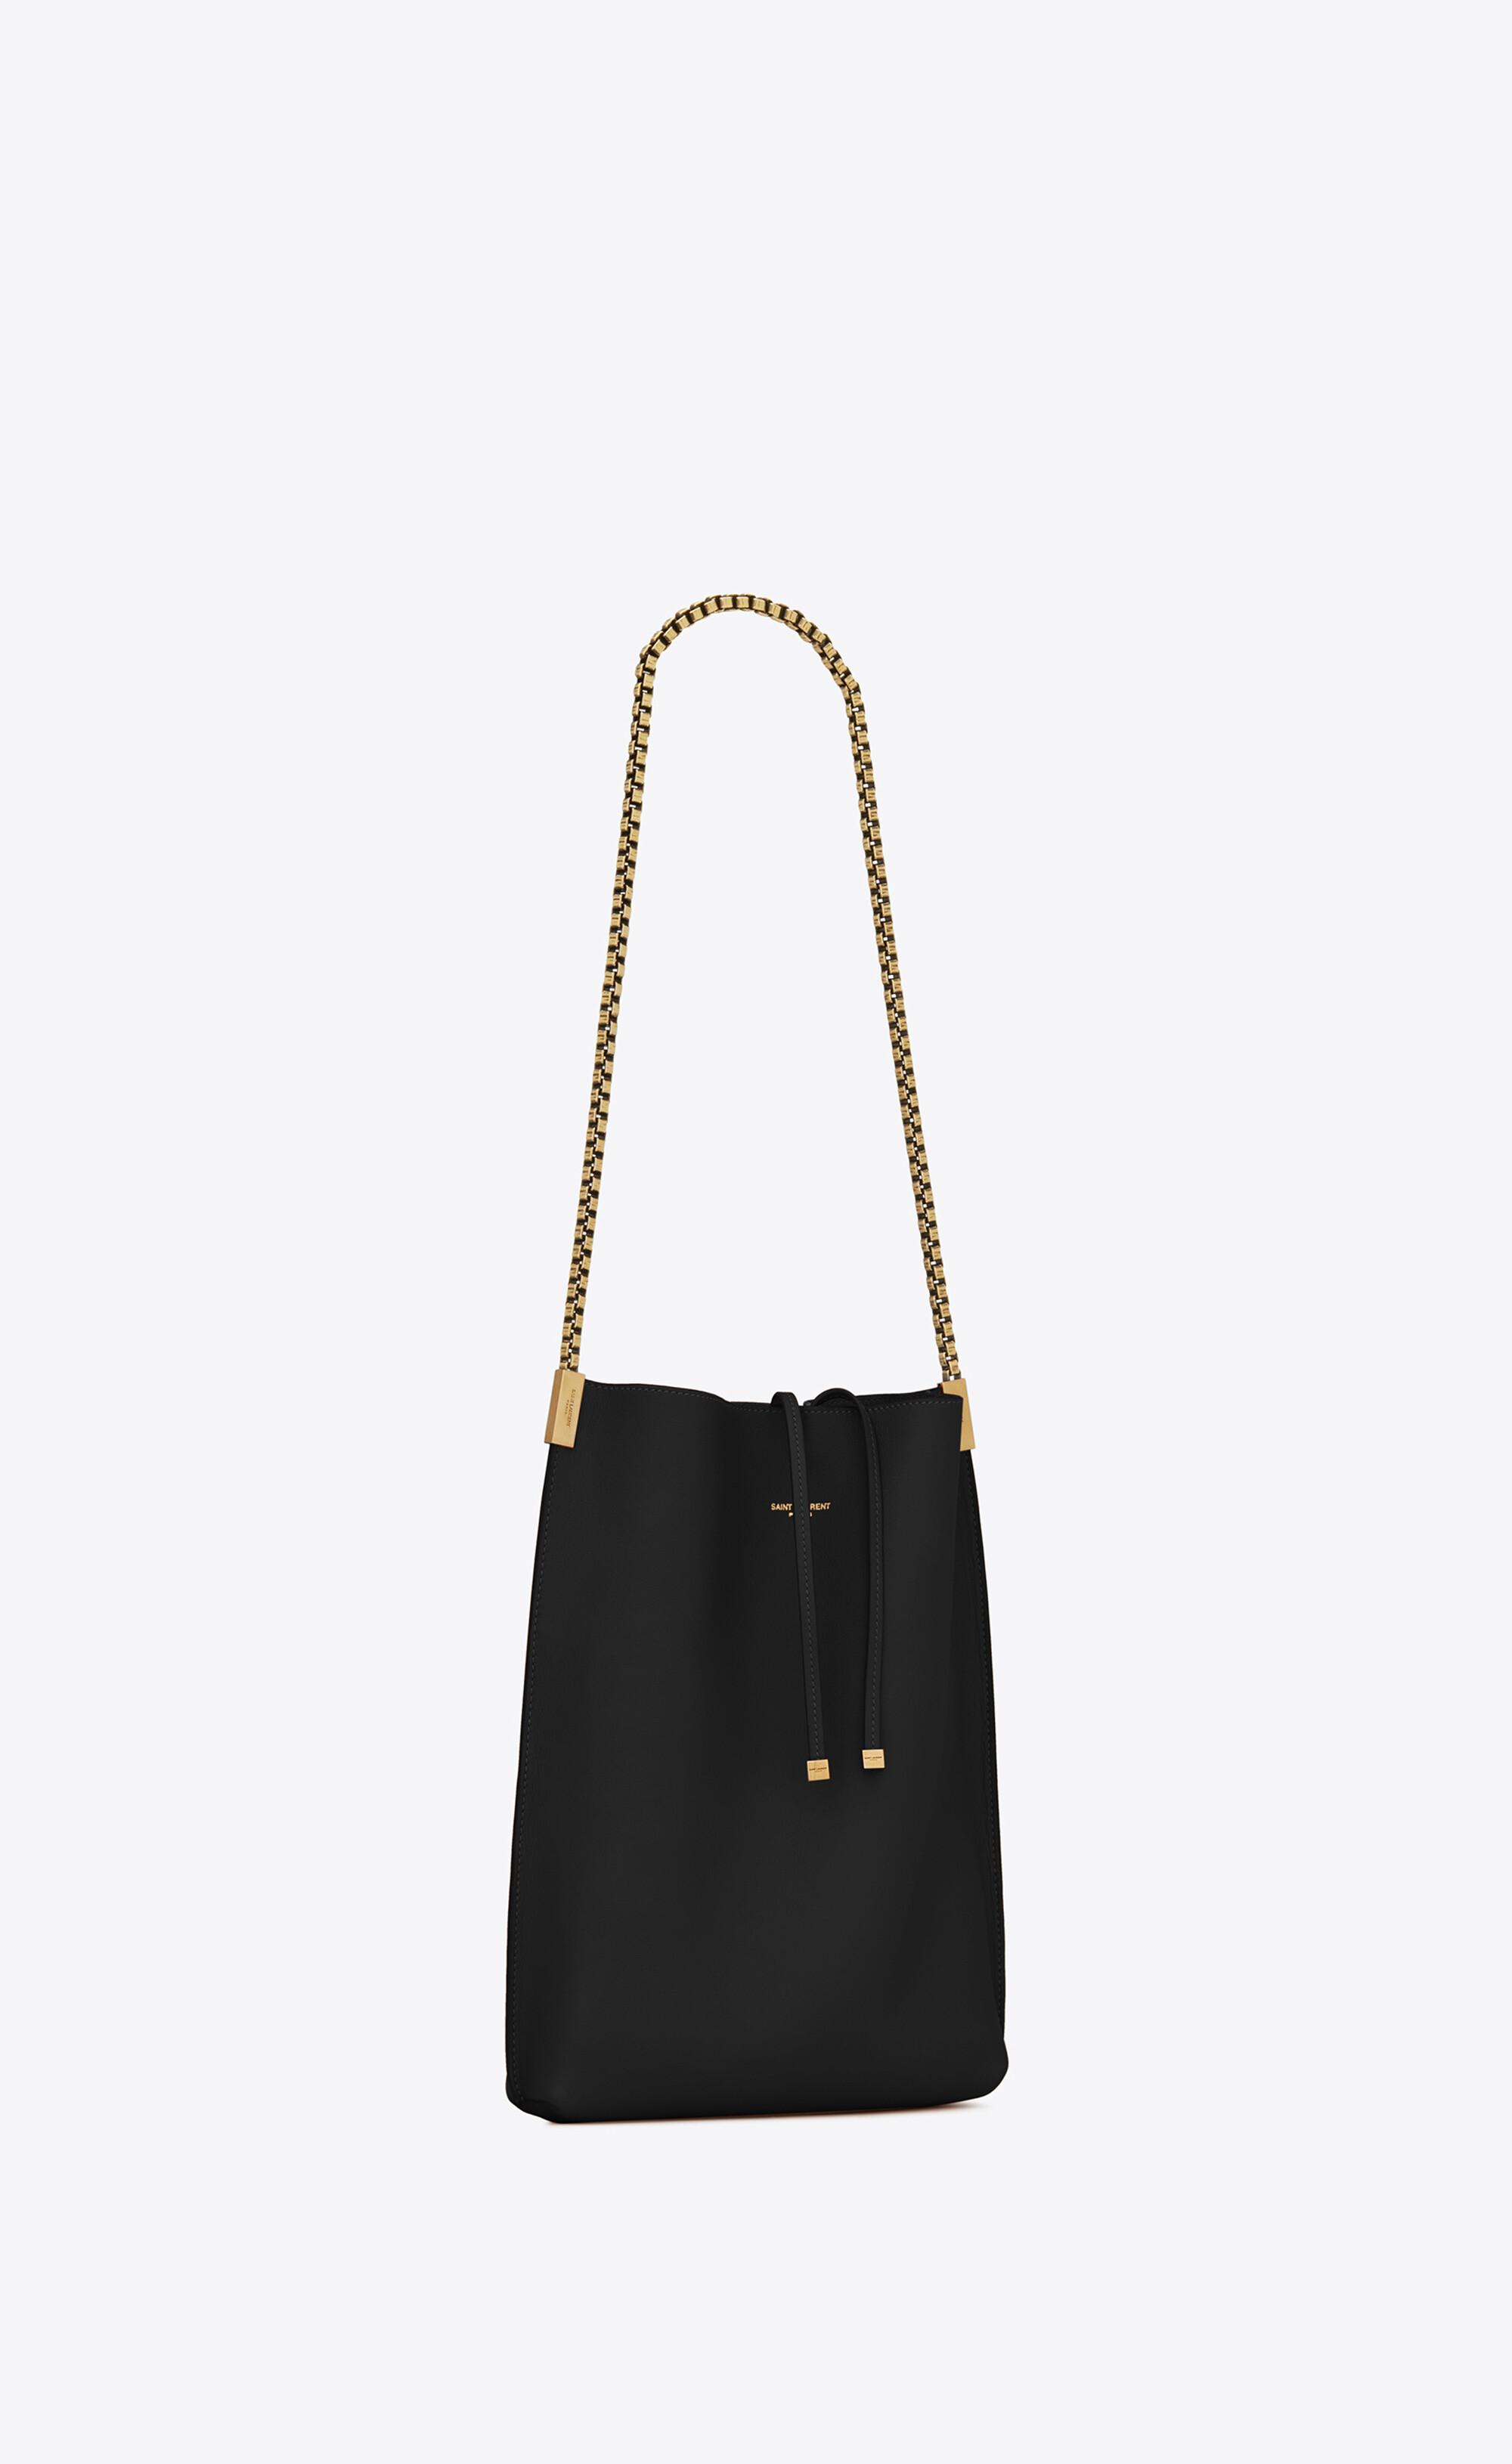 Saint Laurent Suzanne Small Hobo Bag In Smooth Leather in Black - Lyst